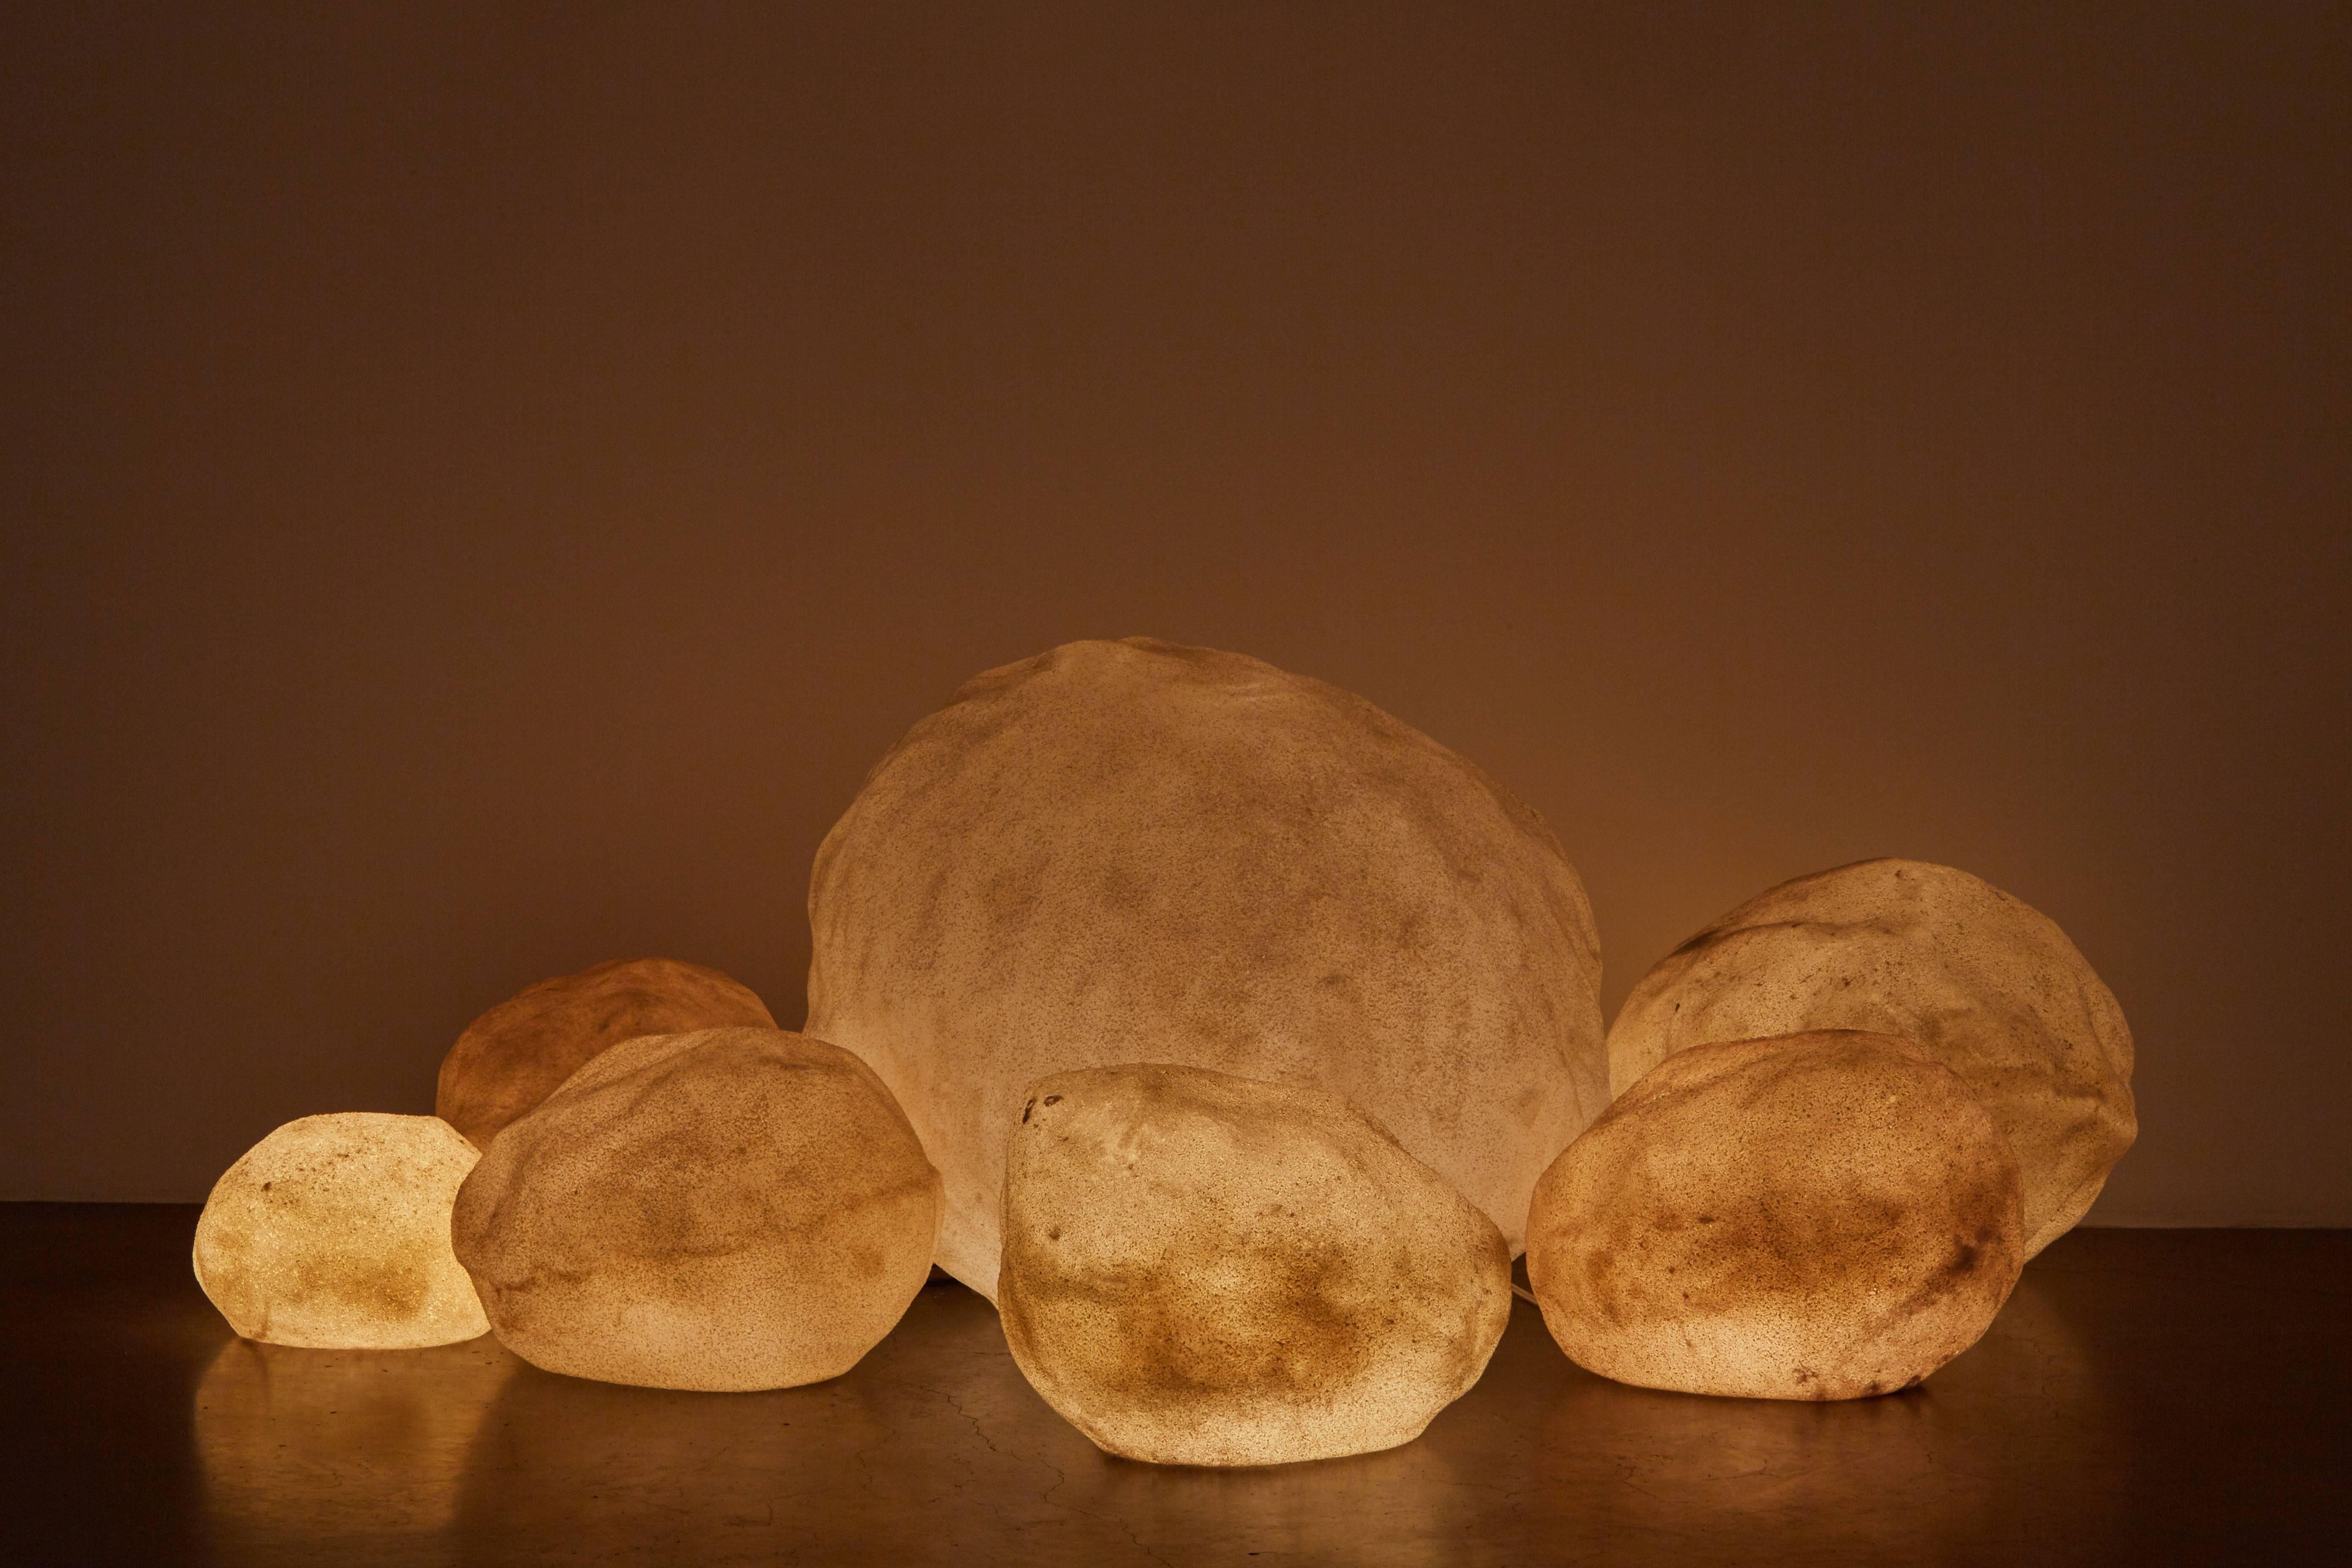 Set of seven hand cast fiberglass rocks. Sold in various sizes as seen as a set or individually. Contact dealer for pricing. Original wiring. Each light takes an E27 40w maximum bulb. Dimensions displayed are for largest rock.